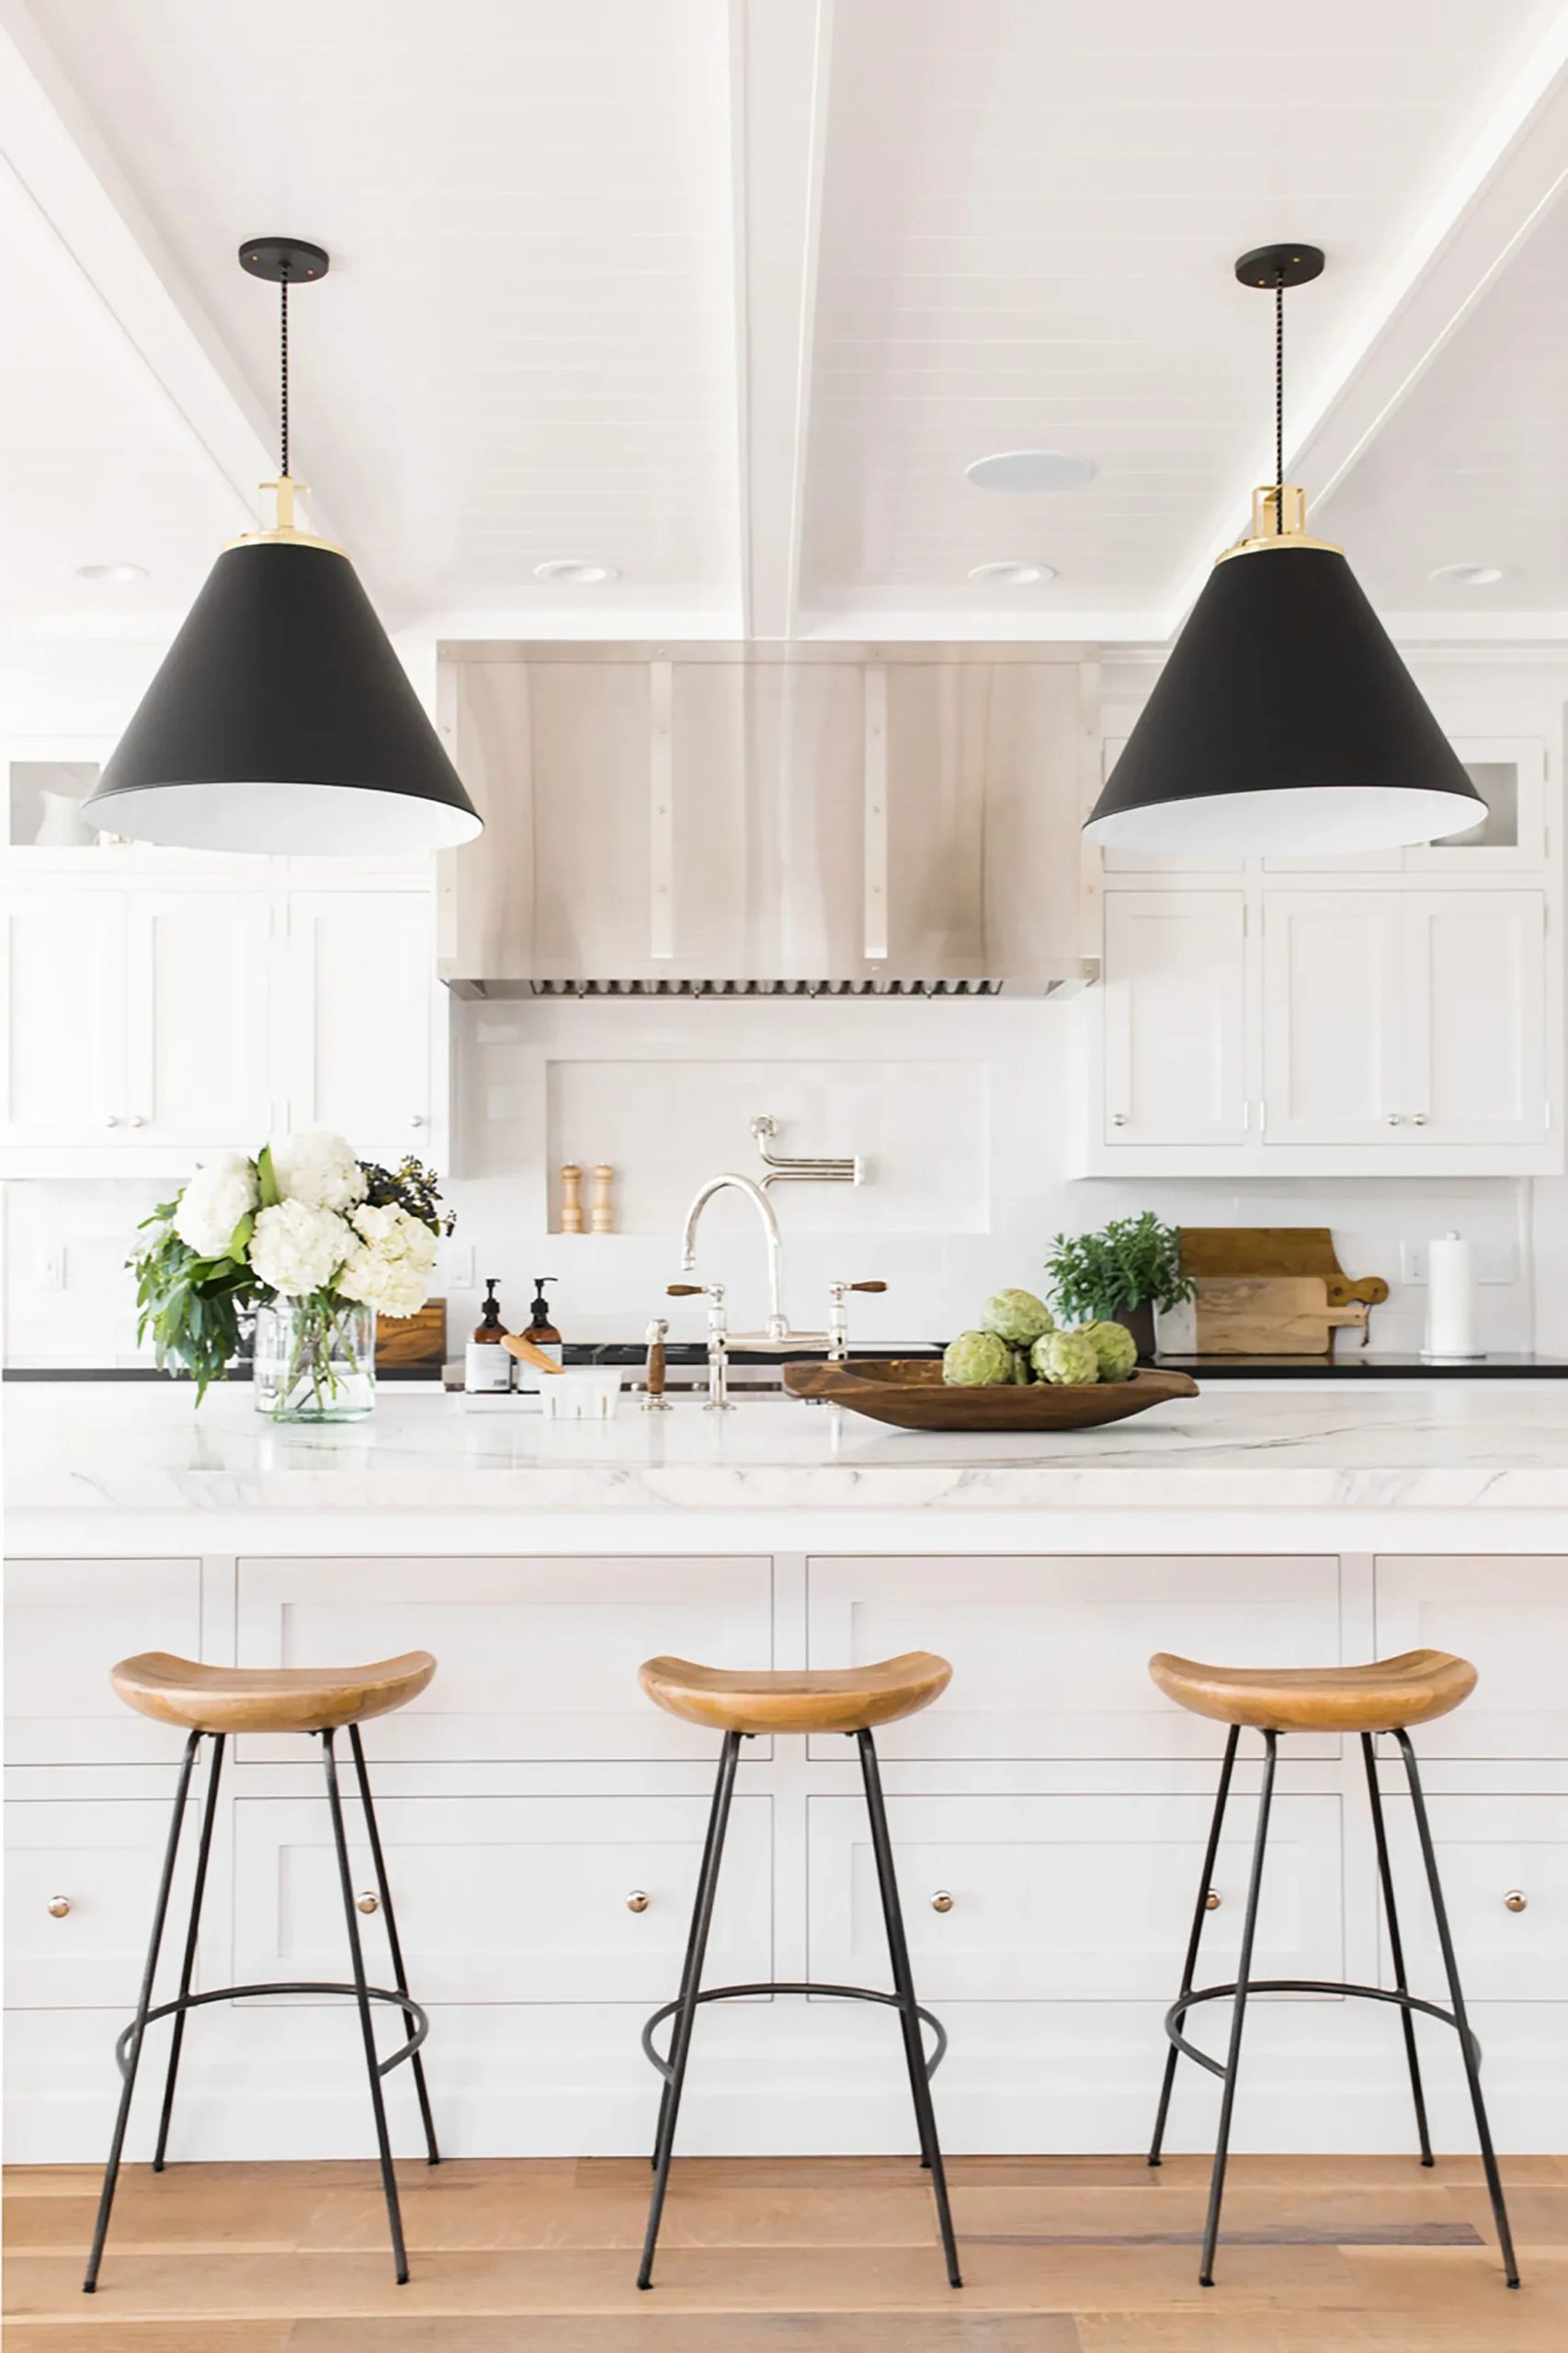 white kitchen cabinets mixed with black dome pendant lights, industrial wood barstools, oak flooring.